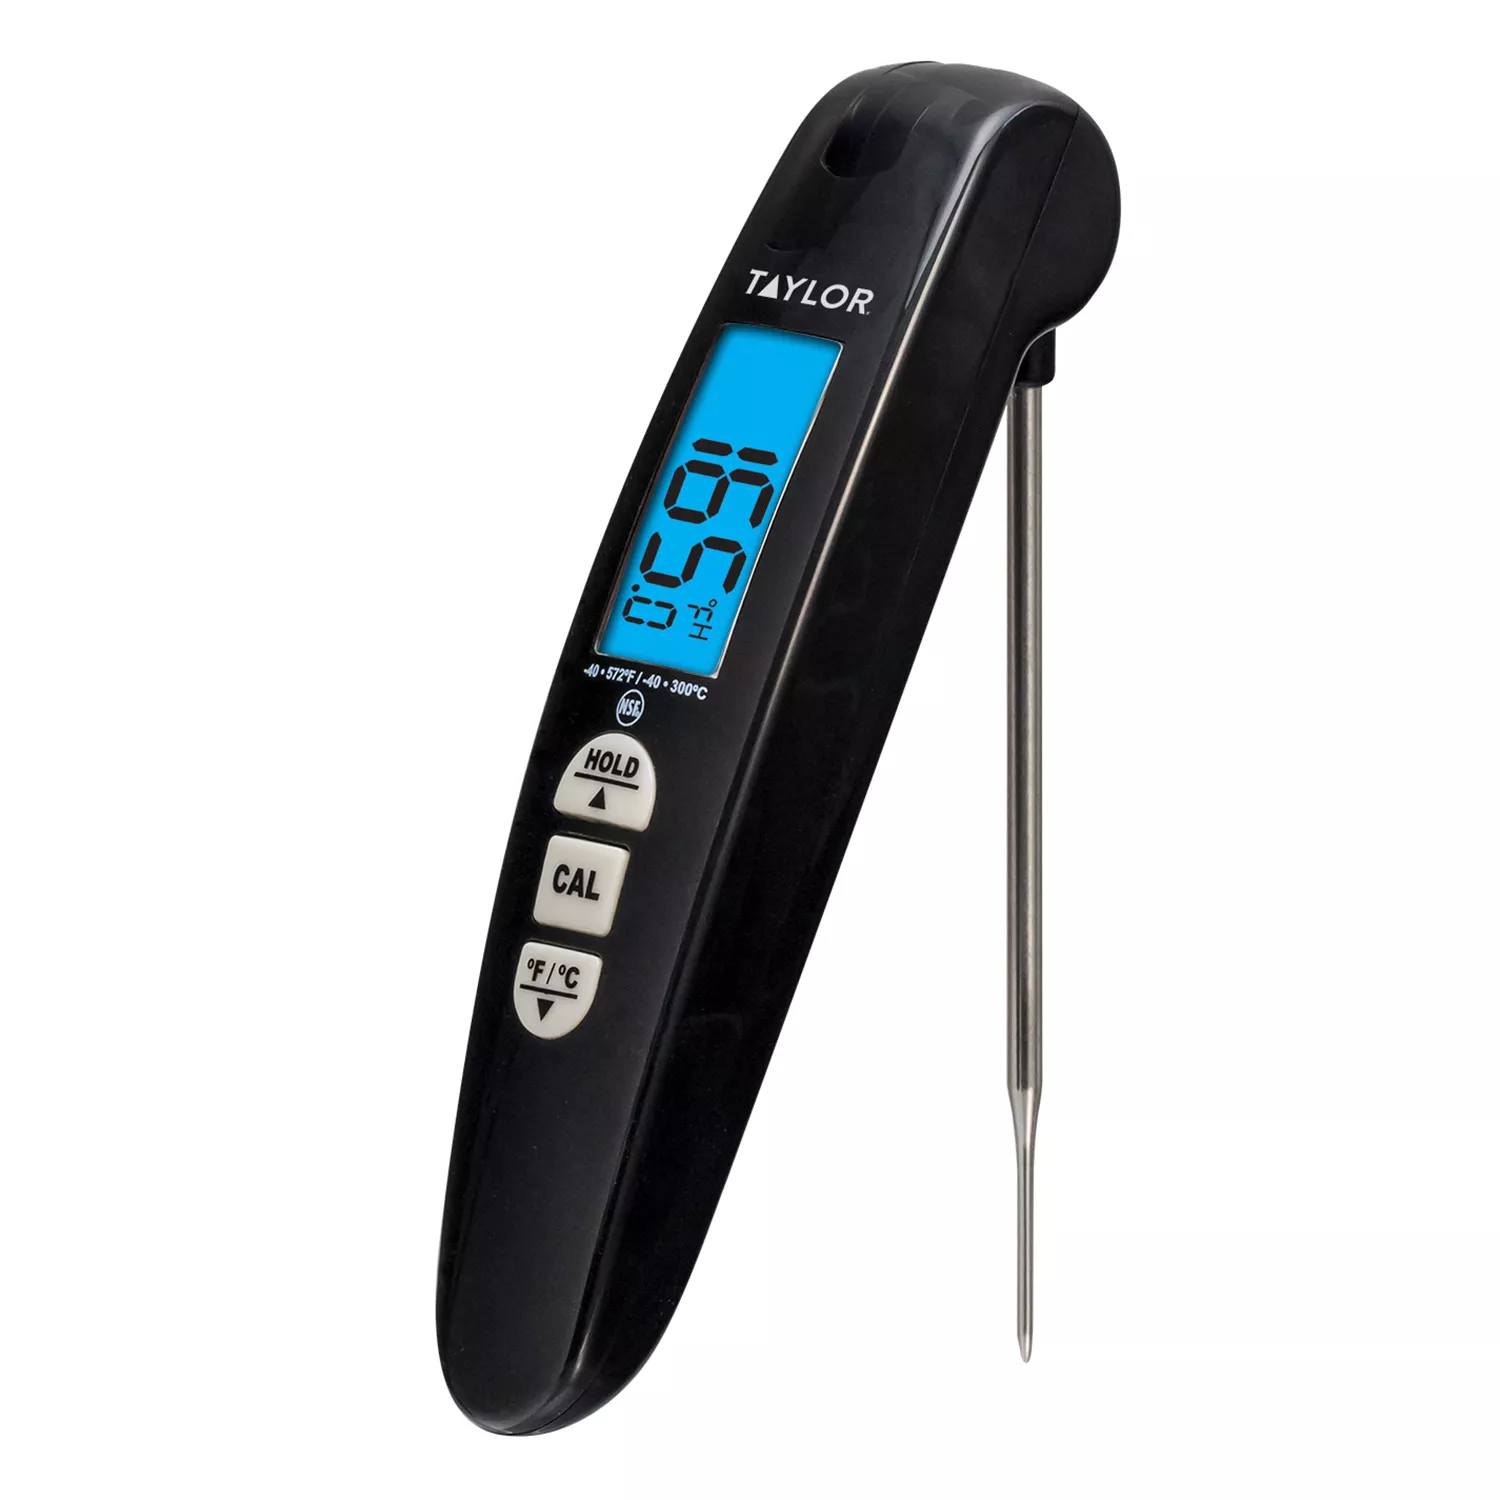 Taylor Digital Thermocouple Thermometer